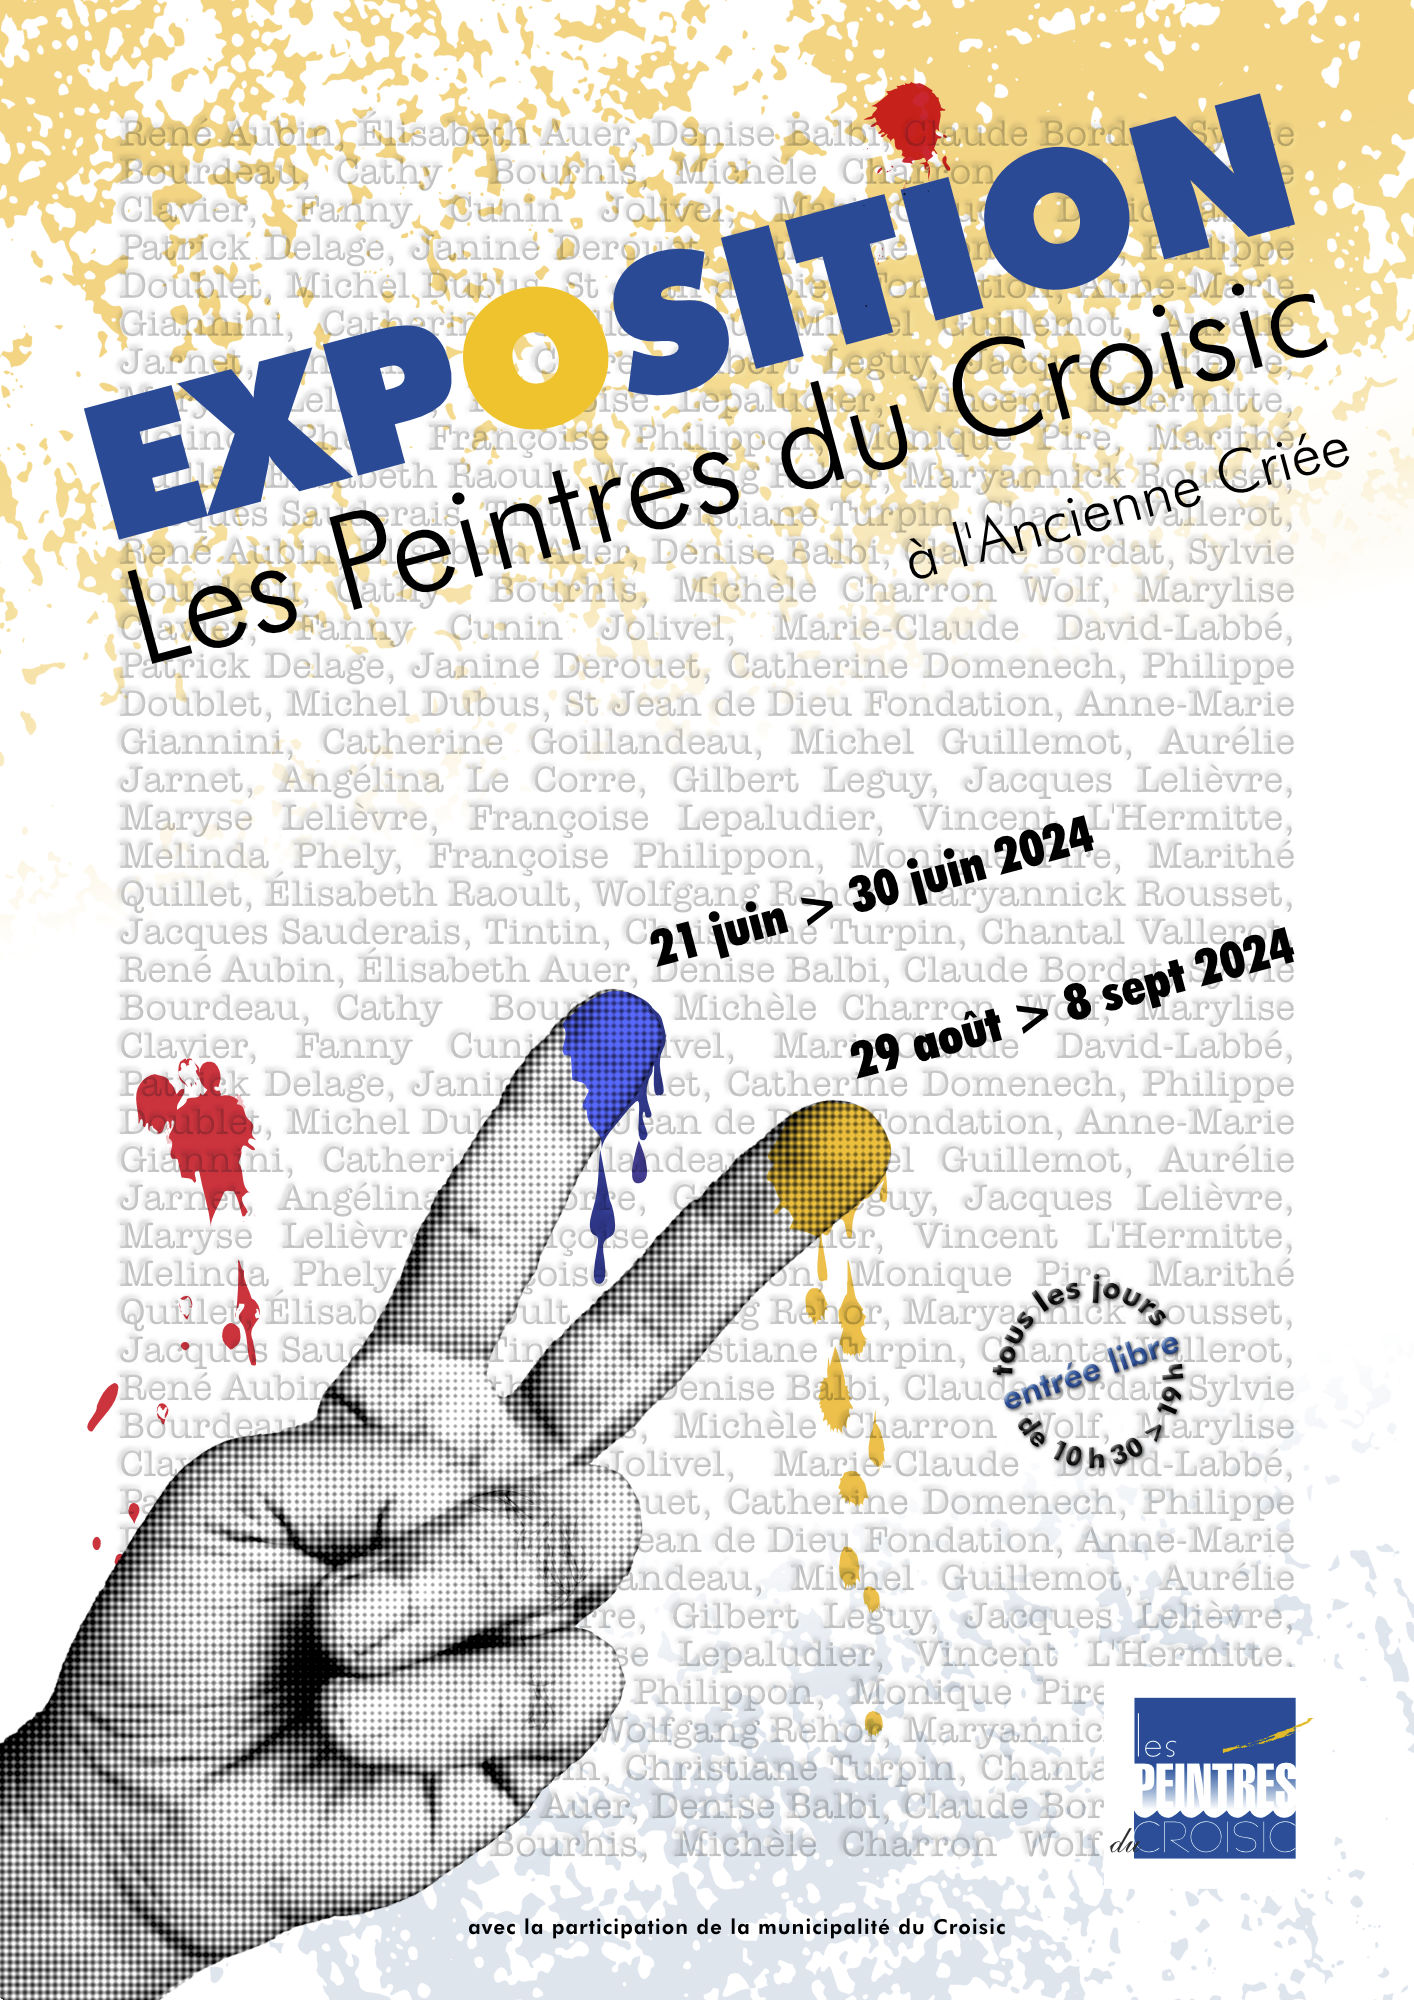 The painters of Le Croisic – 10:30 a.m. to 19 p.m.